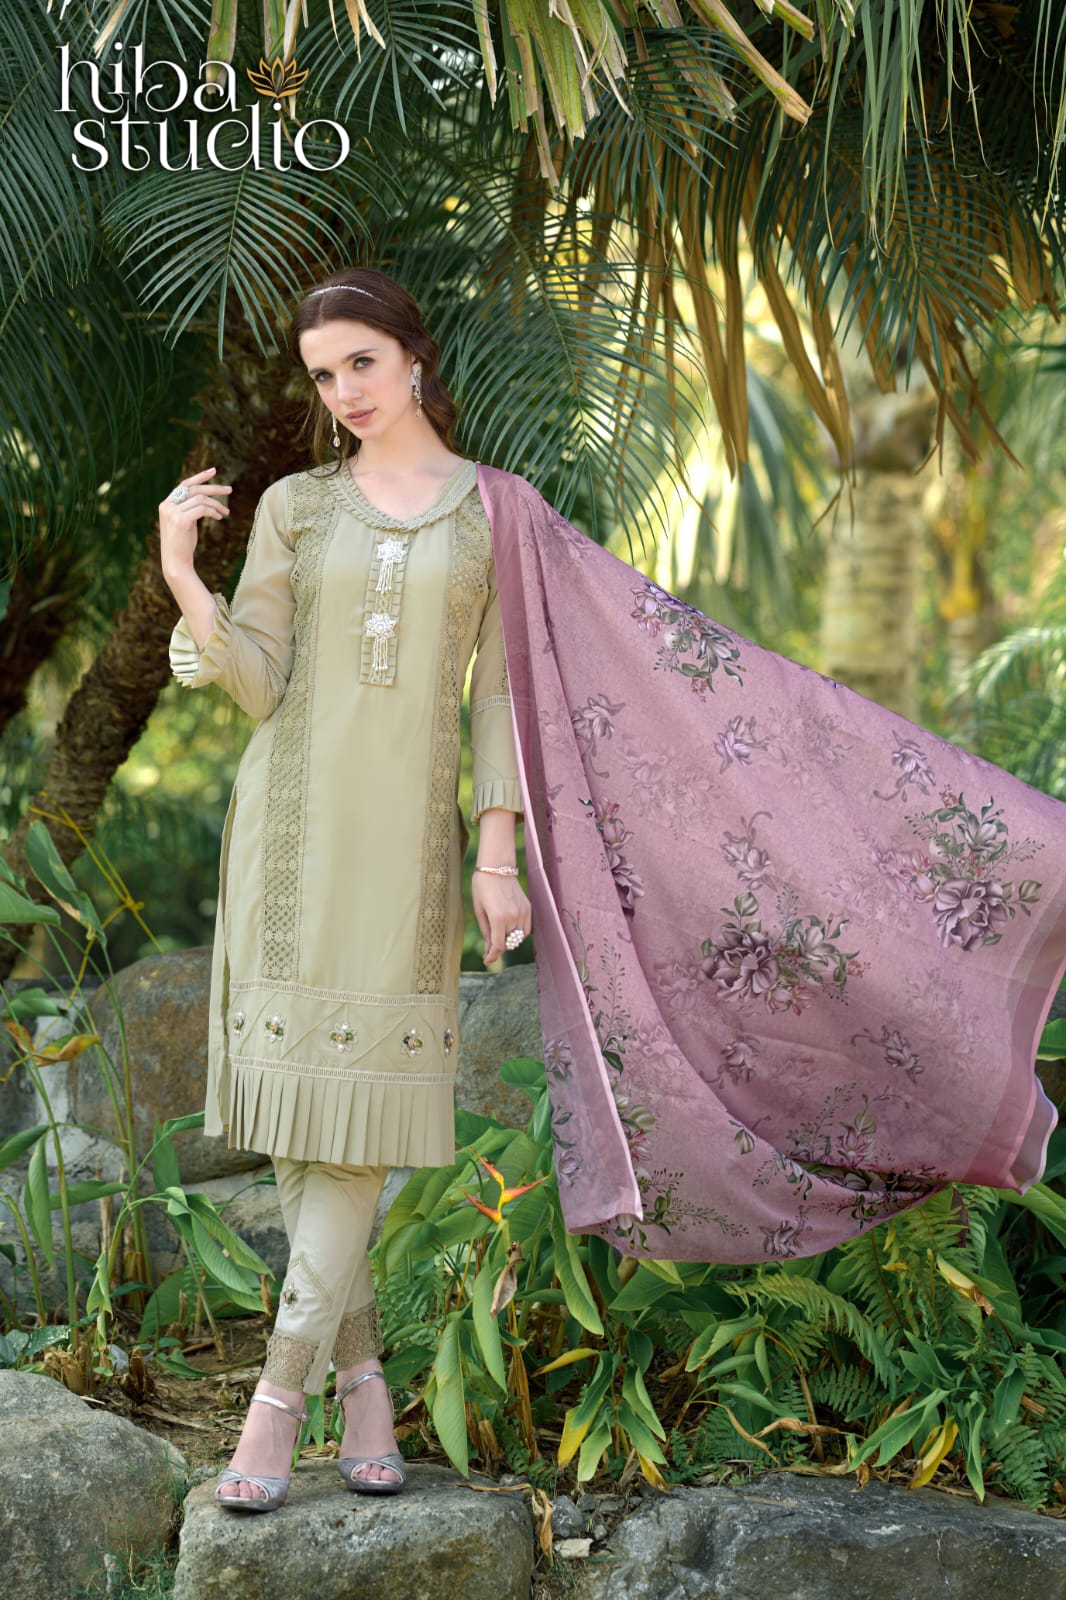 LPC 50 BY HIBA STUDIO EXCLUSIVE DESIGNER FAUX GEORGETTE READYMADE PAKISTANI SUITS Anant Tex Exports Private Limited